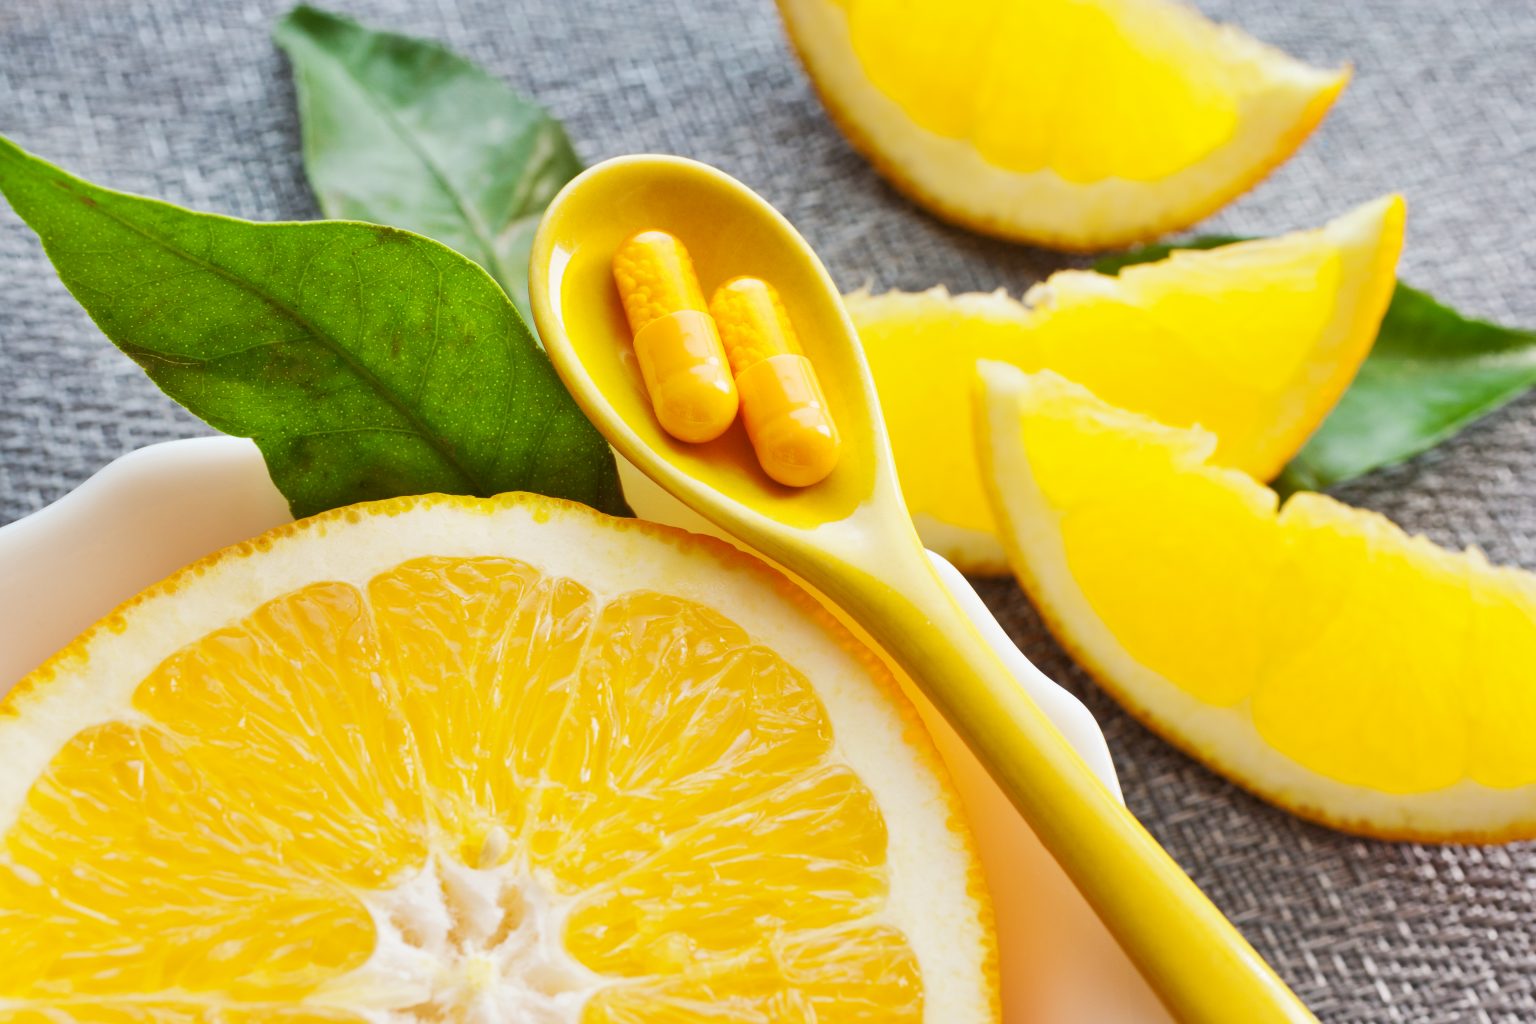 Vitamin C For Hair Loss: Does It Help? 2021